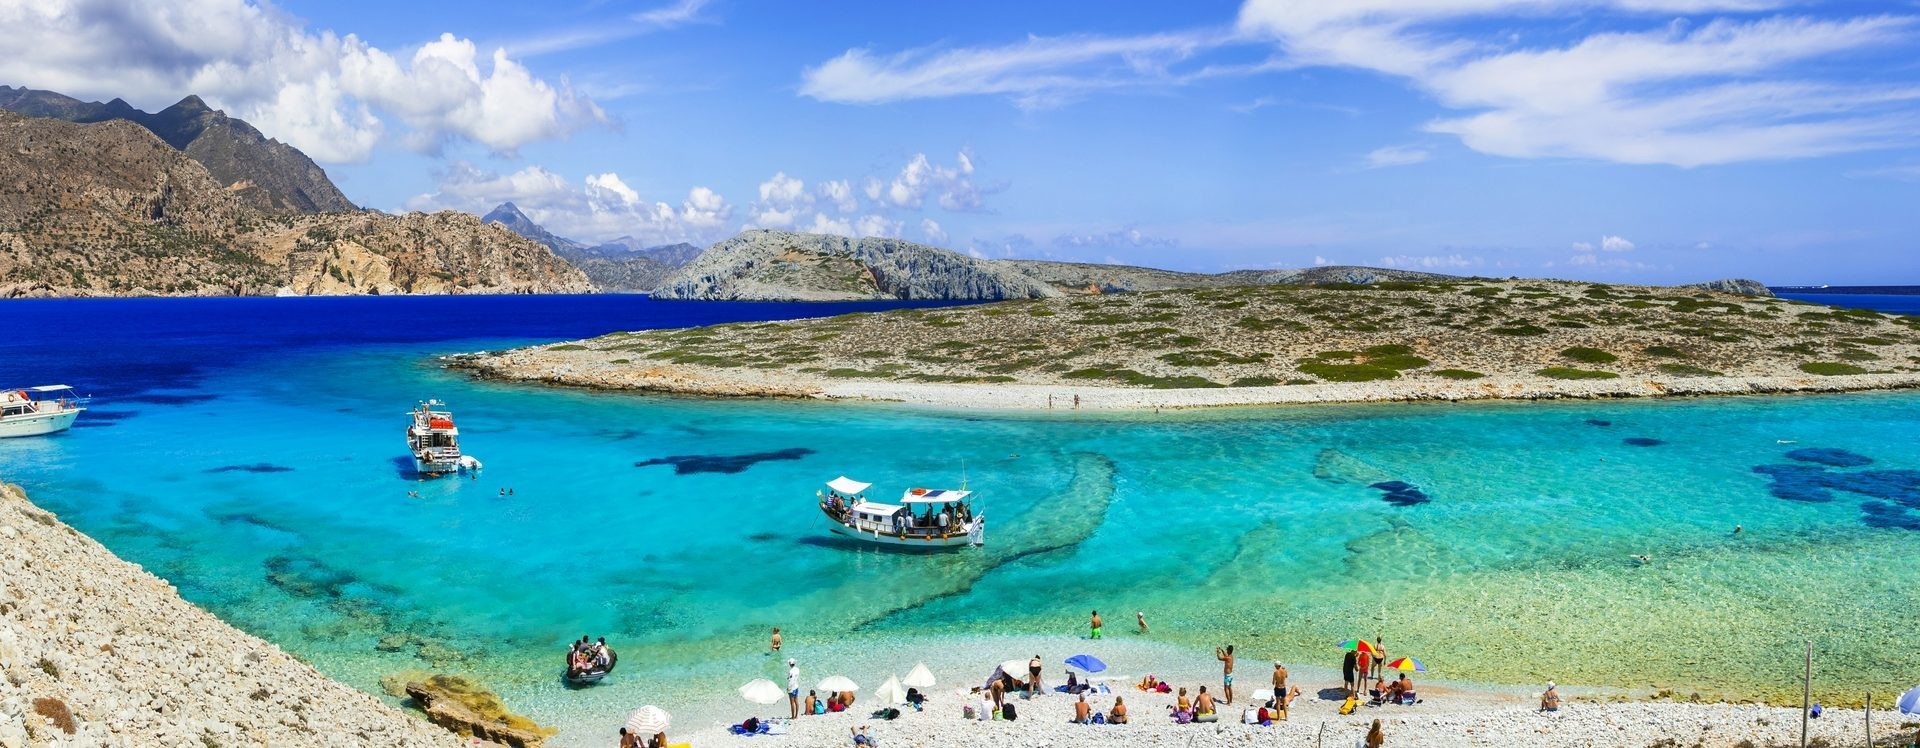 Greece and Turkey: Sailing Tour in the Dodecanese